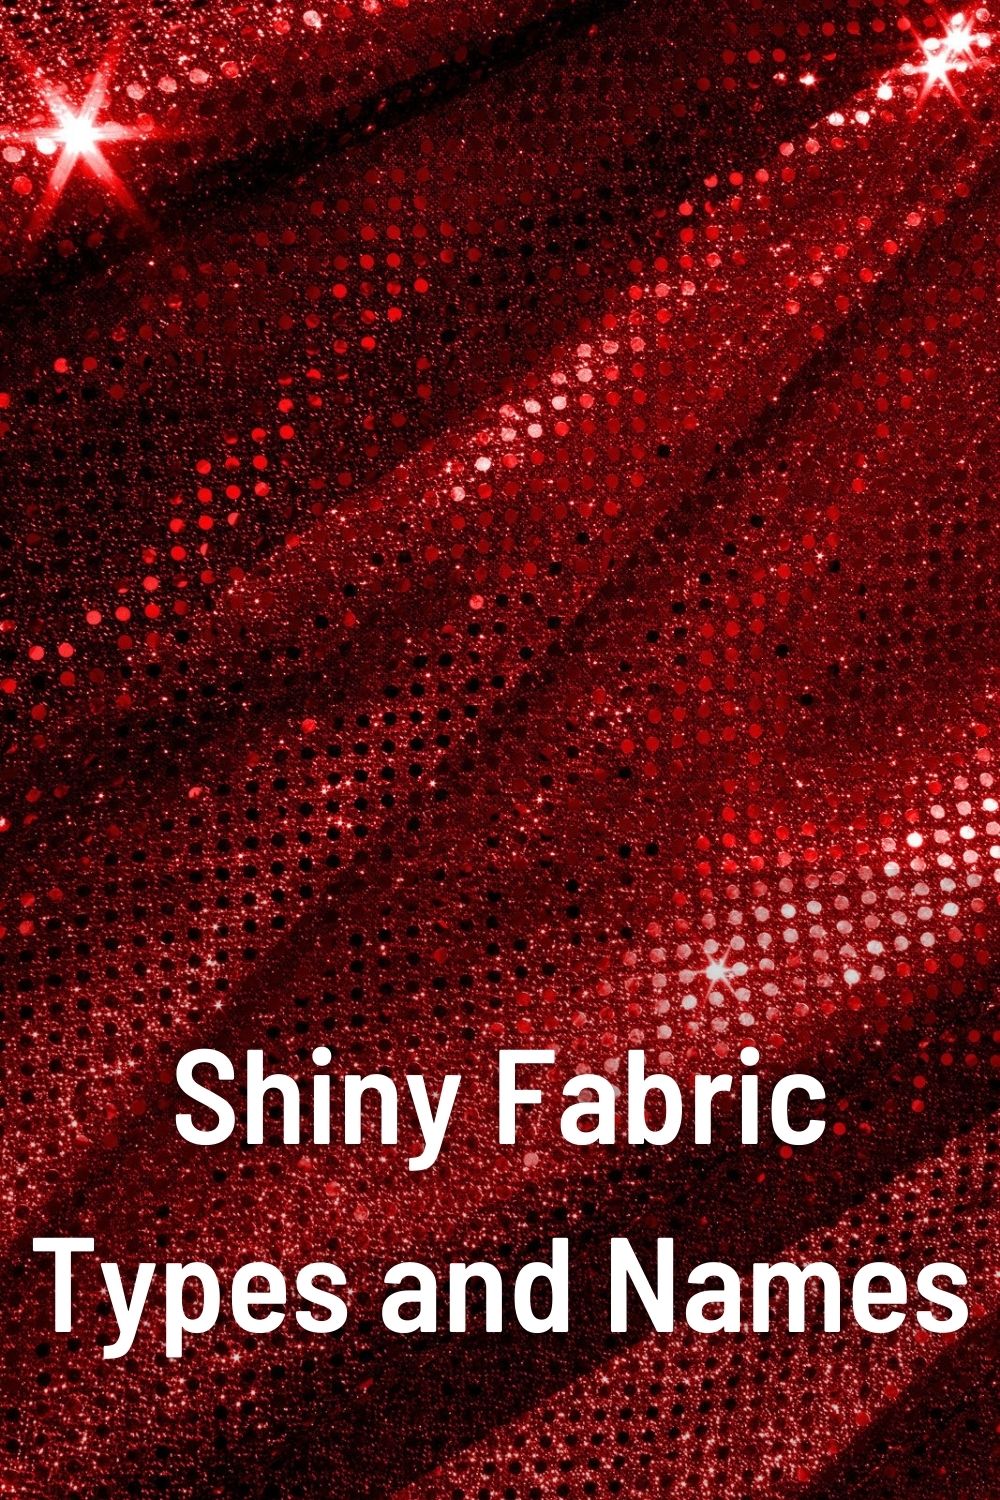 Shiny Fabric Types and Names